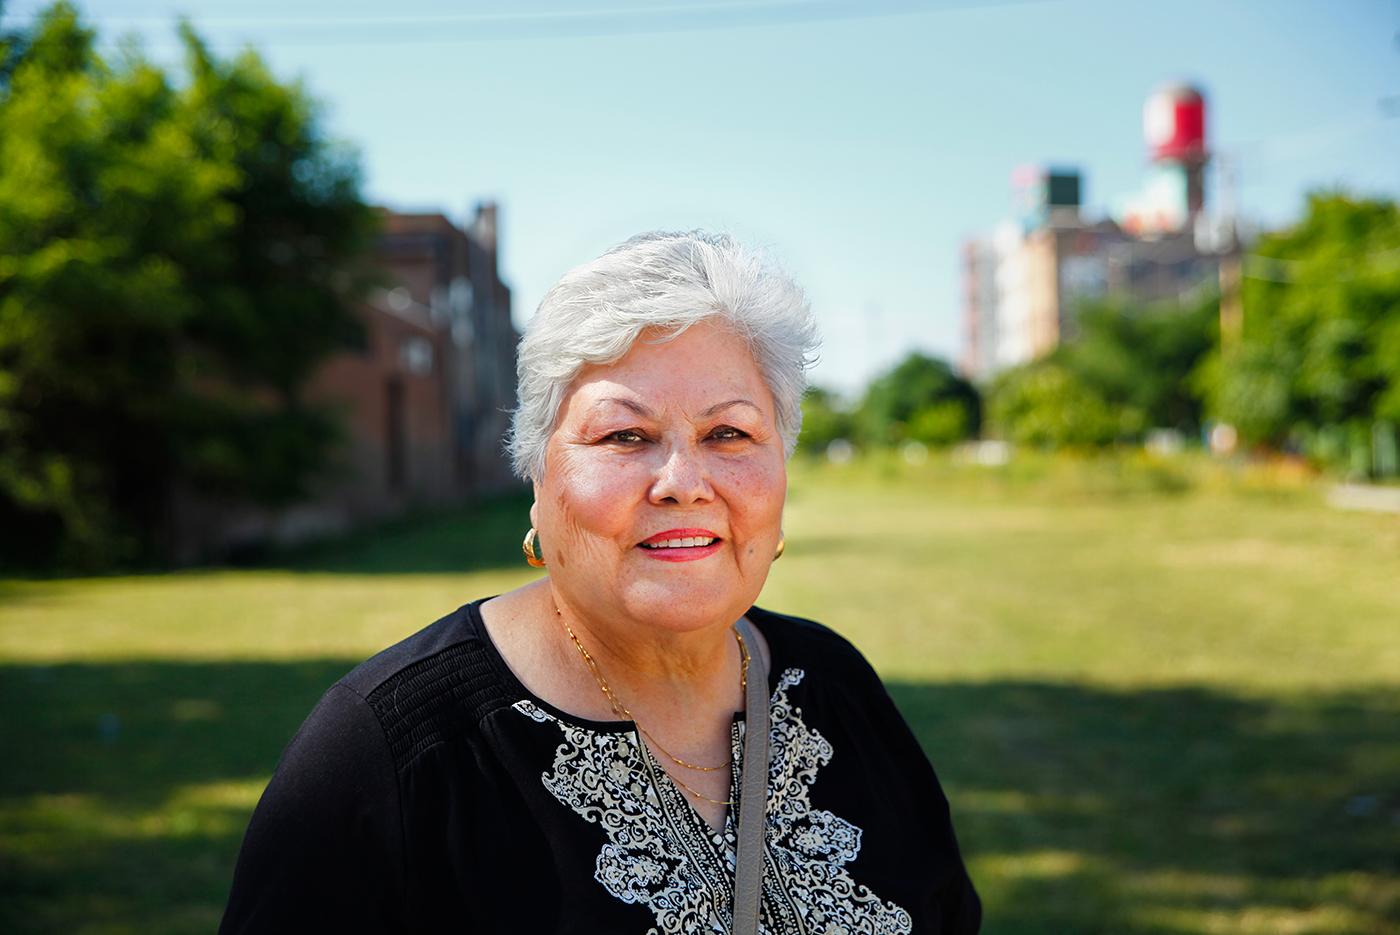 Longtime community activist Teresa Fraga stands near the site where crews could soon begin building a proposed “rails to trails” path from Pilsen to South Lawndale.